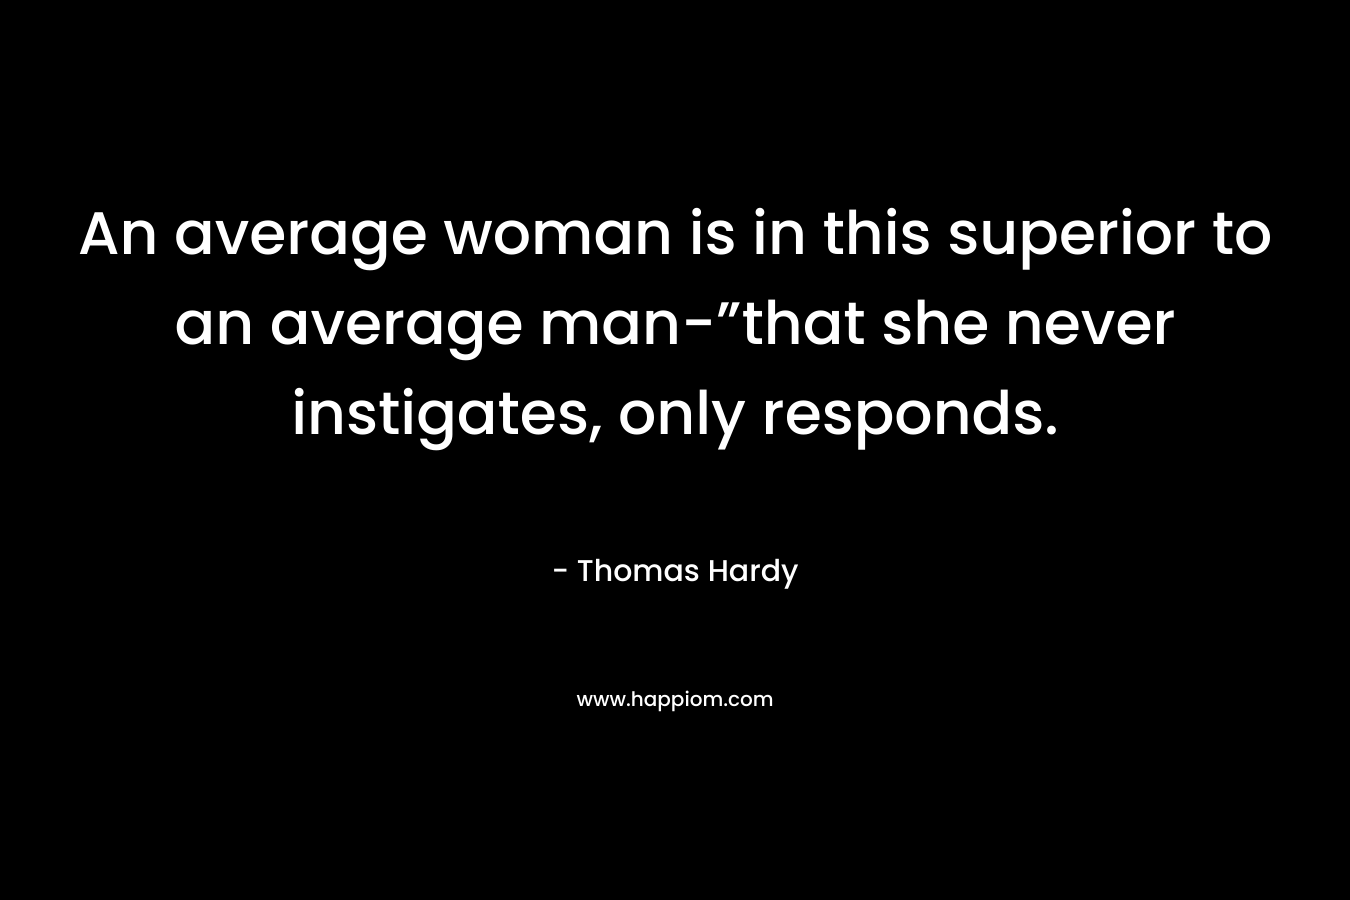 An average woman is in this superior to an average man-”that she never instigates, only responds. – Thomas Hardy